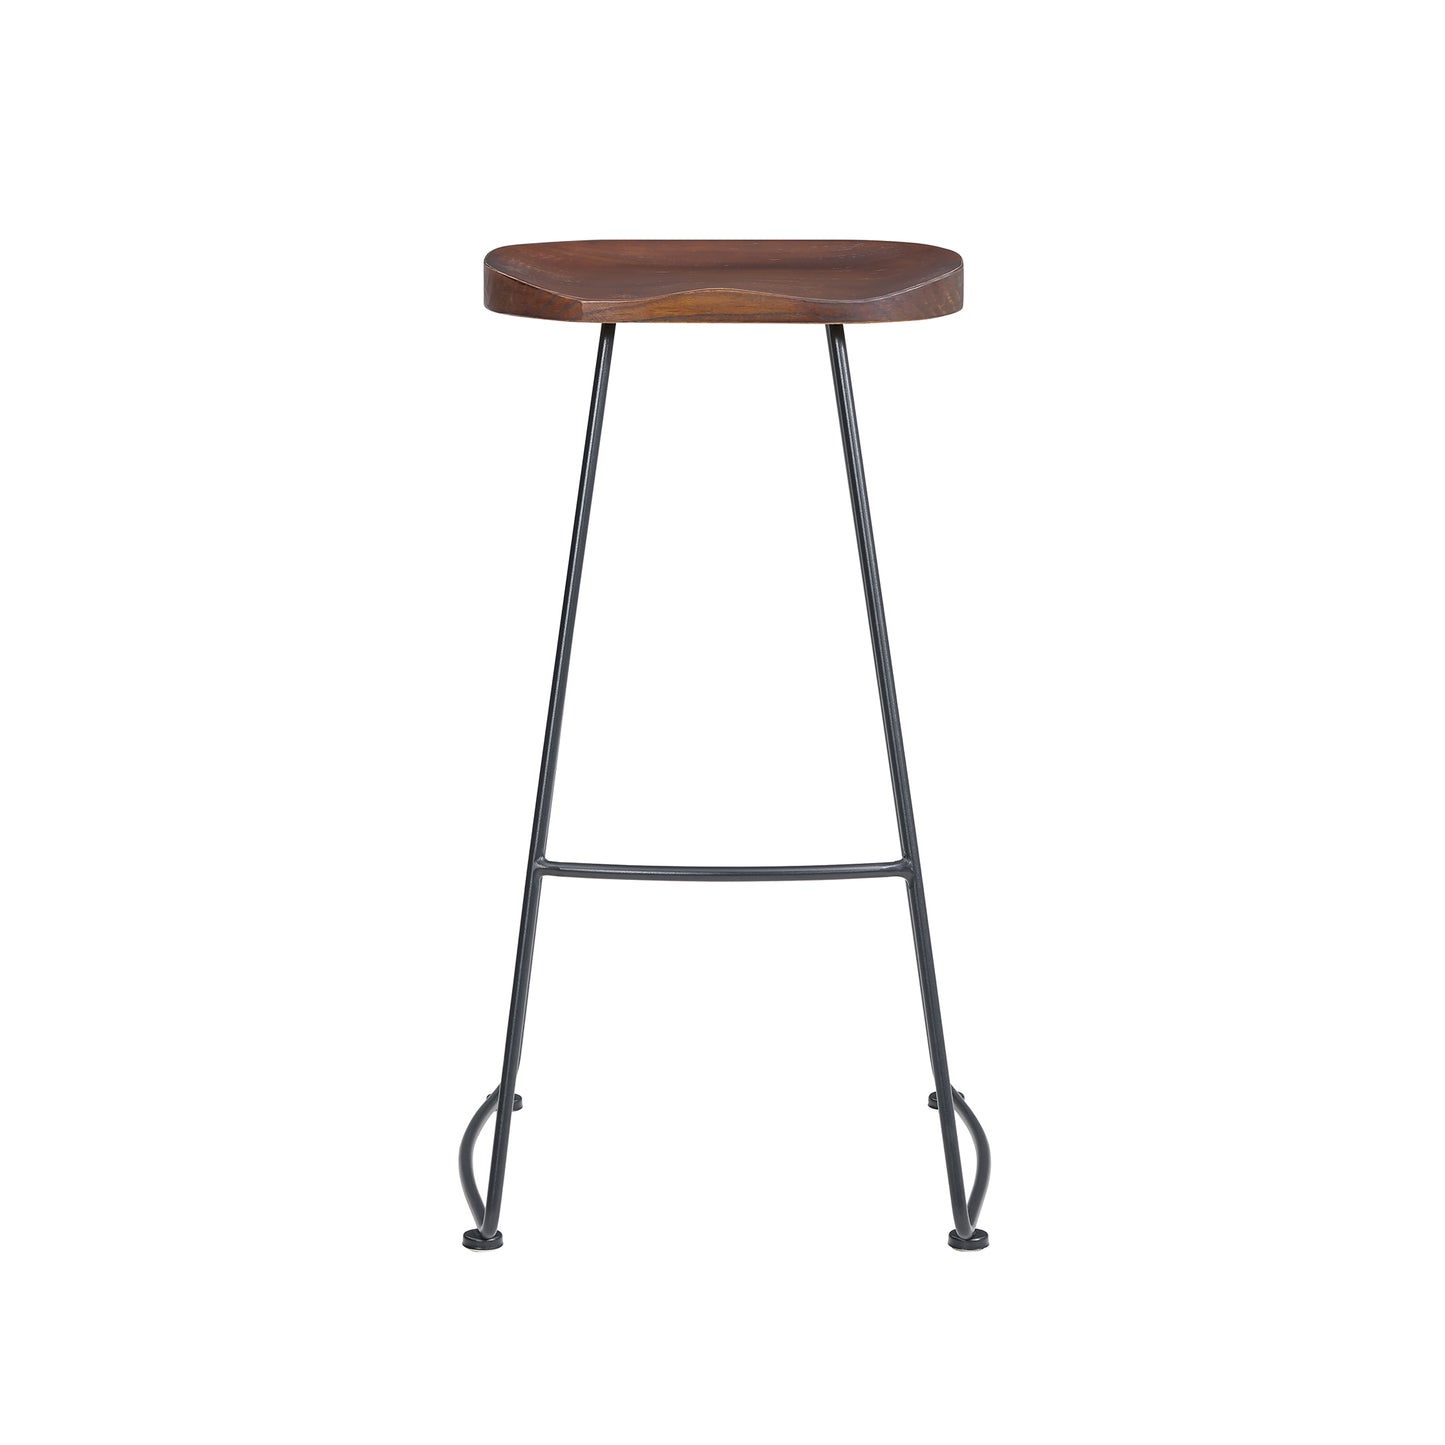 Load image into Gallery viewer, Antero Stool - Set of 2 BAR AND COUNTER STOOL Eurostyle     Four Hands, Mid Century Modern Furniture, Old Bones Furniture Company, Old Bones Co, Modern Mid Century, Designer Furniture, https://www.oldbonesco.com/
